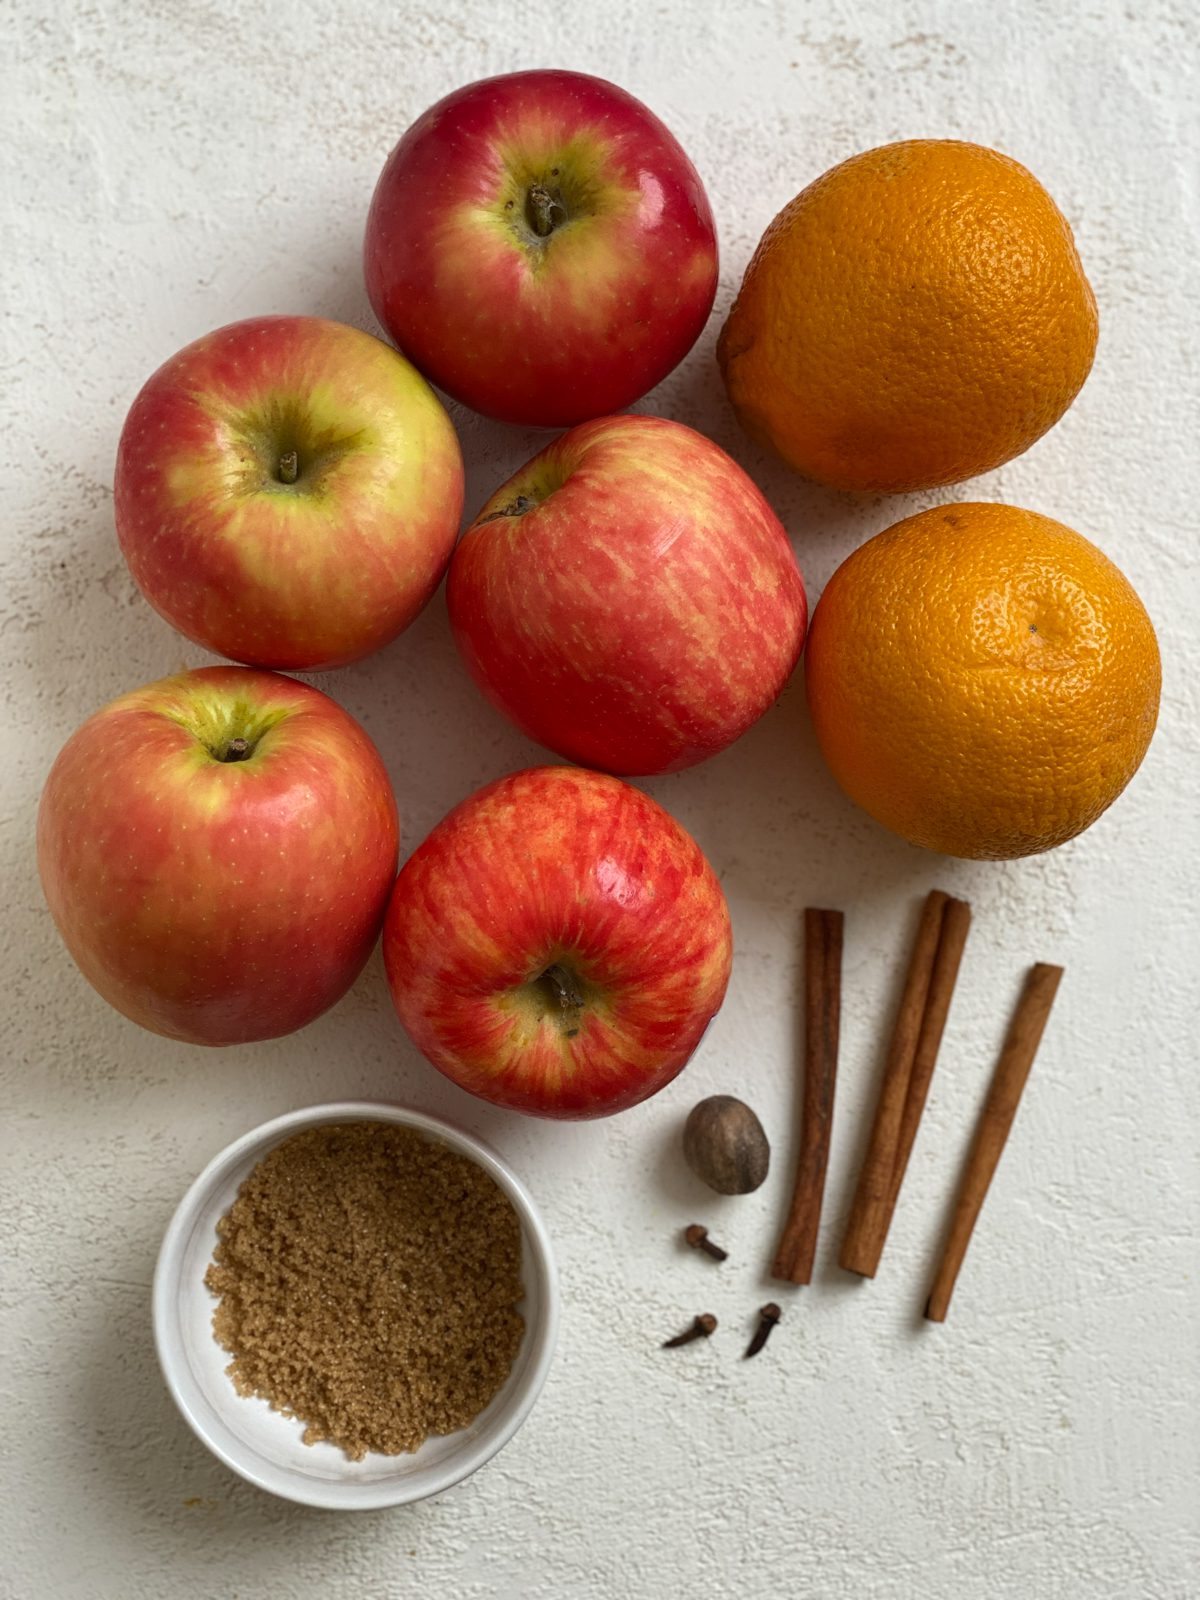 ingredients for Vegan Instant Pot Apple Cider against a white surface